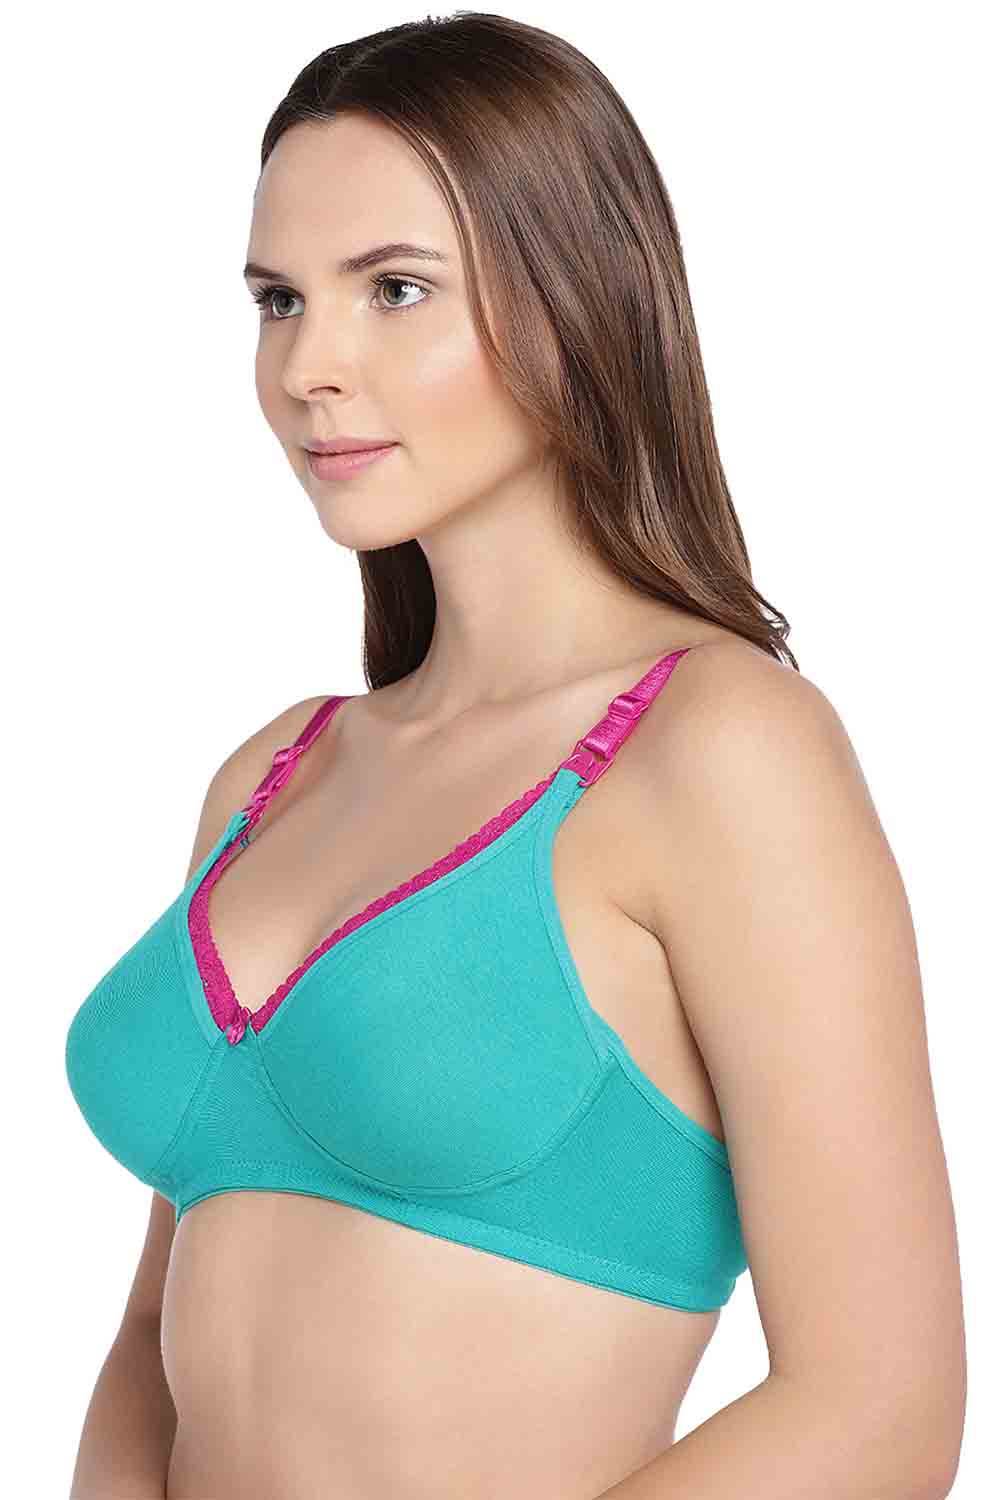 Details of Cotton Thin Maternity Nursing Bra Intimate Clothes For